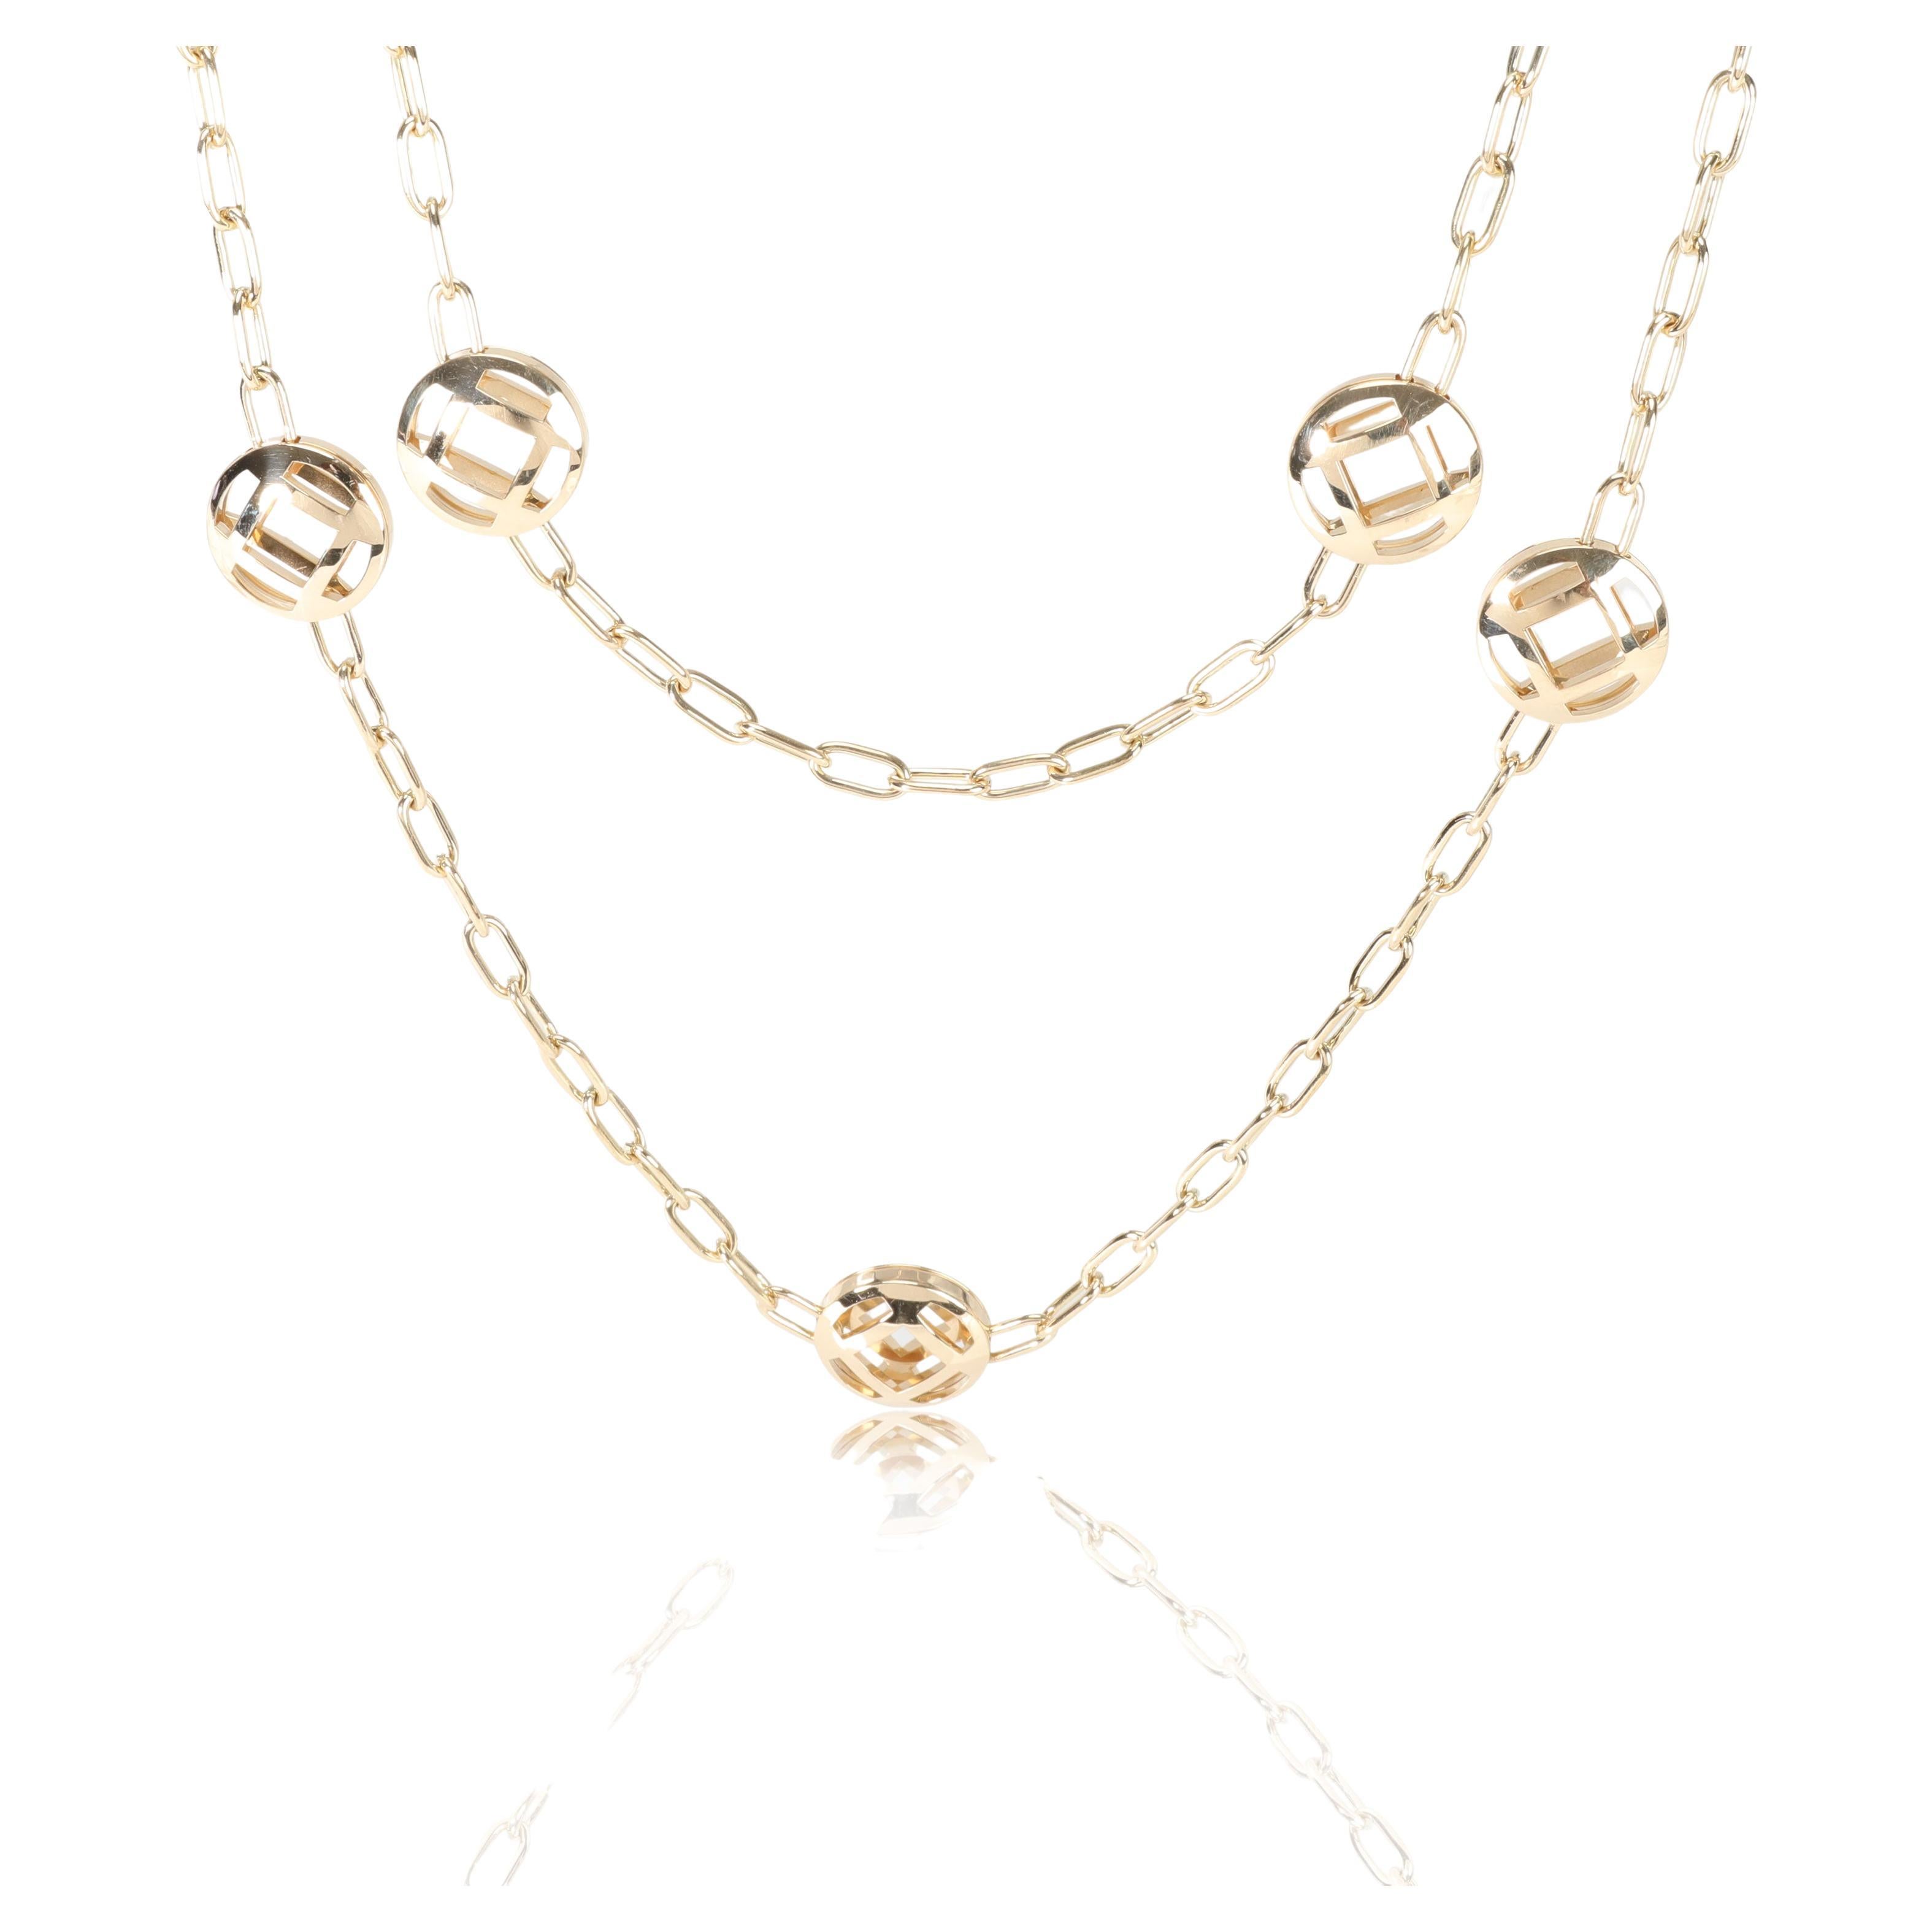 Cartier Pasha Necklace in 18K Yellow Gold